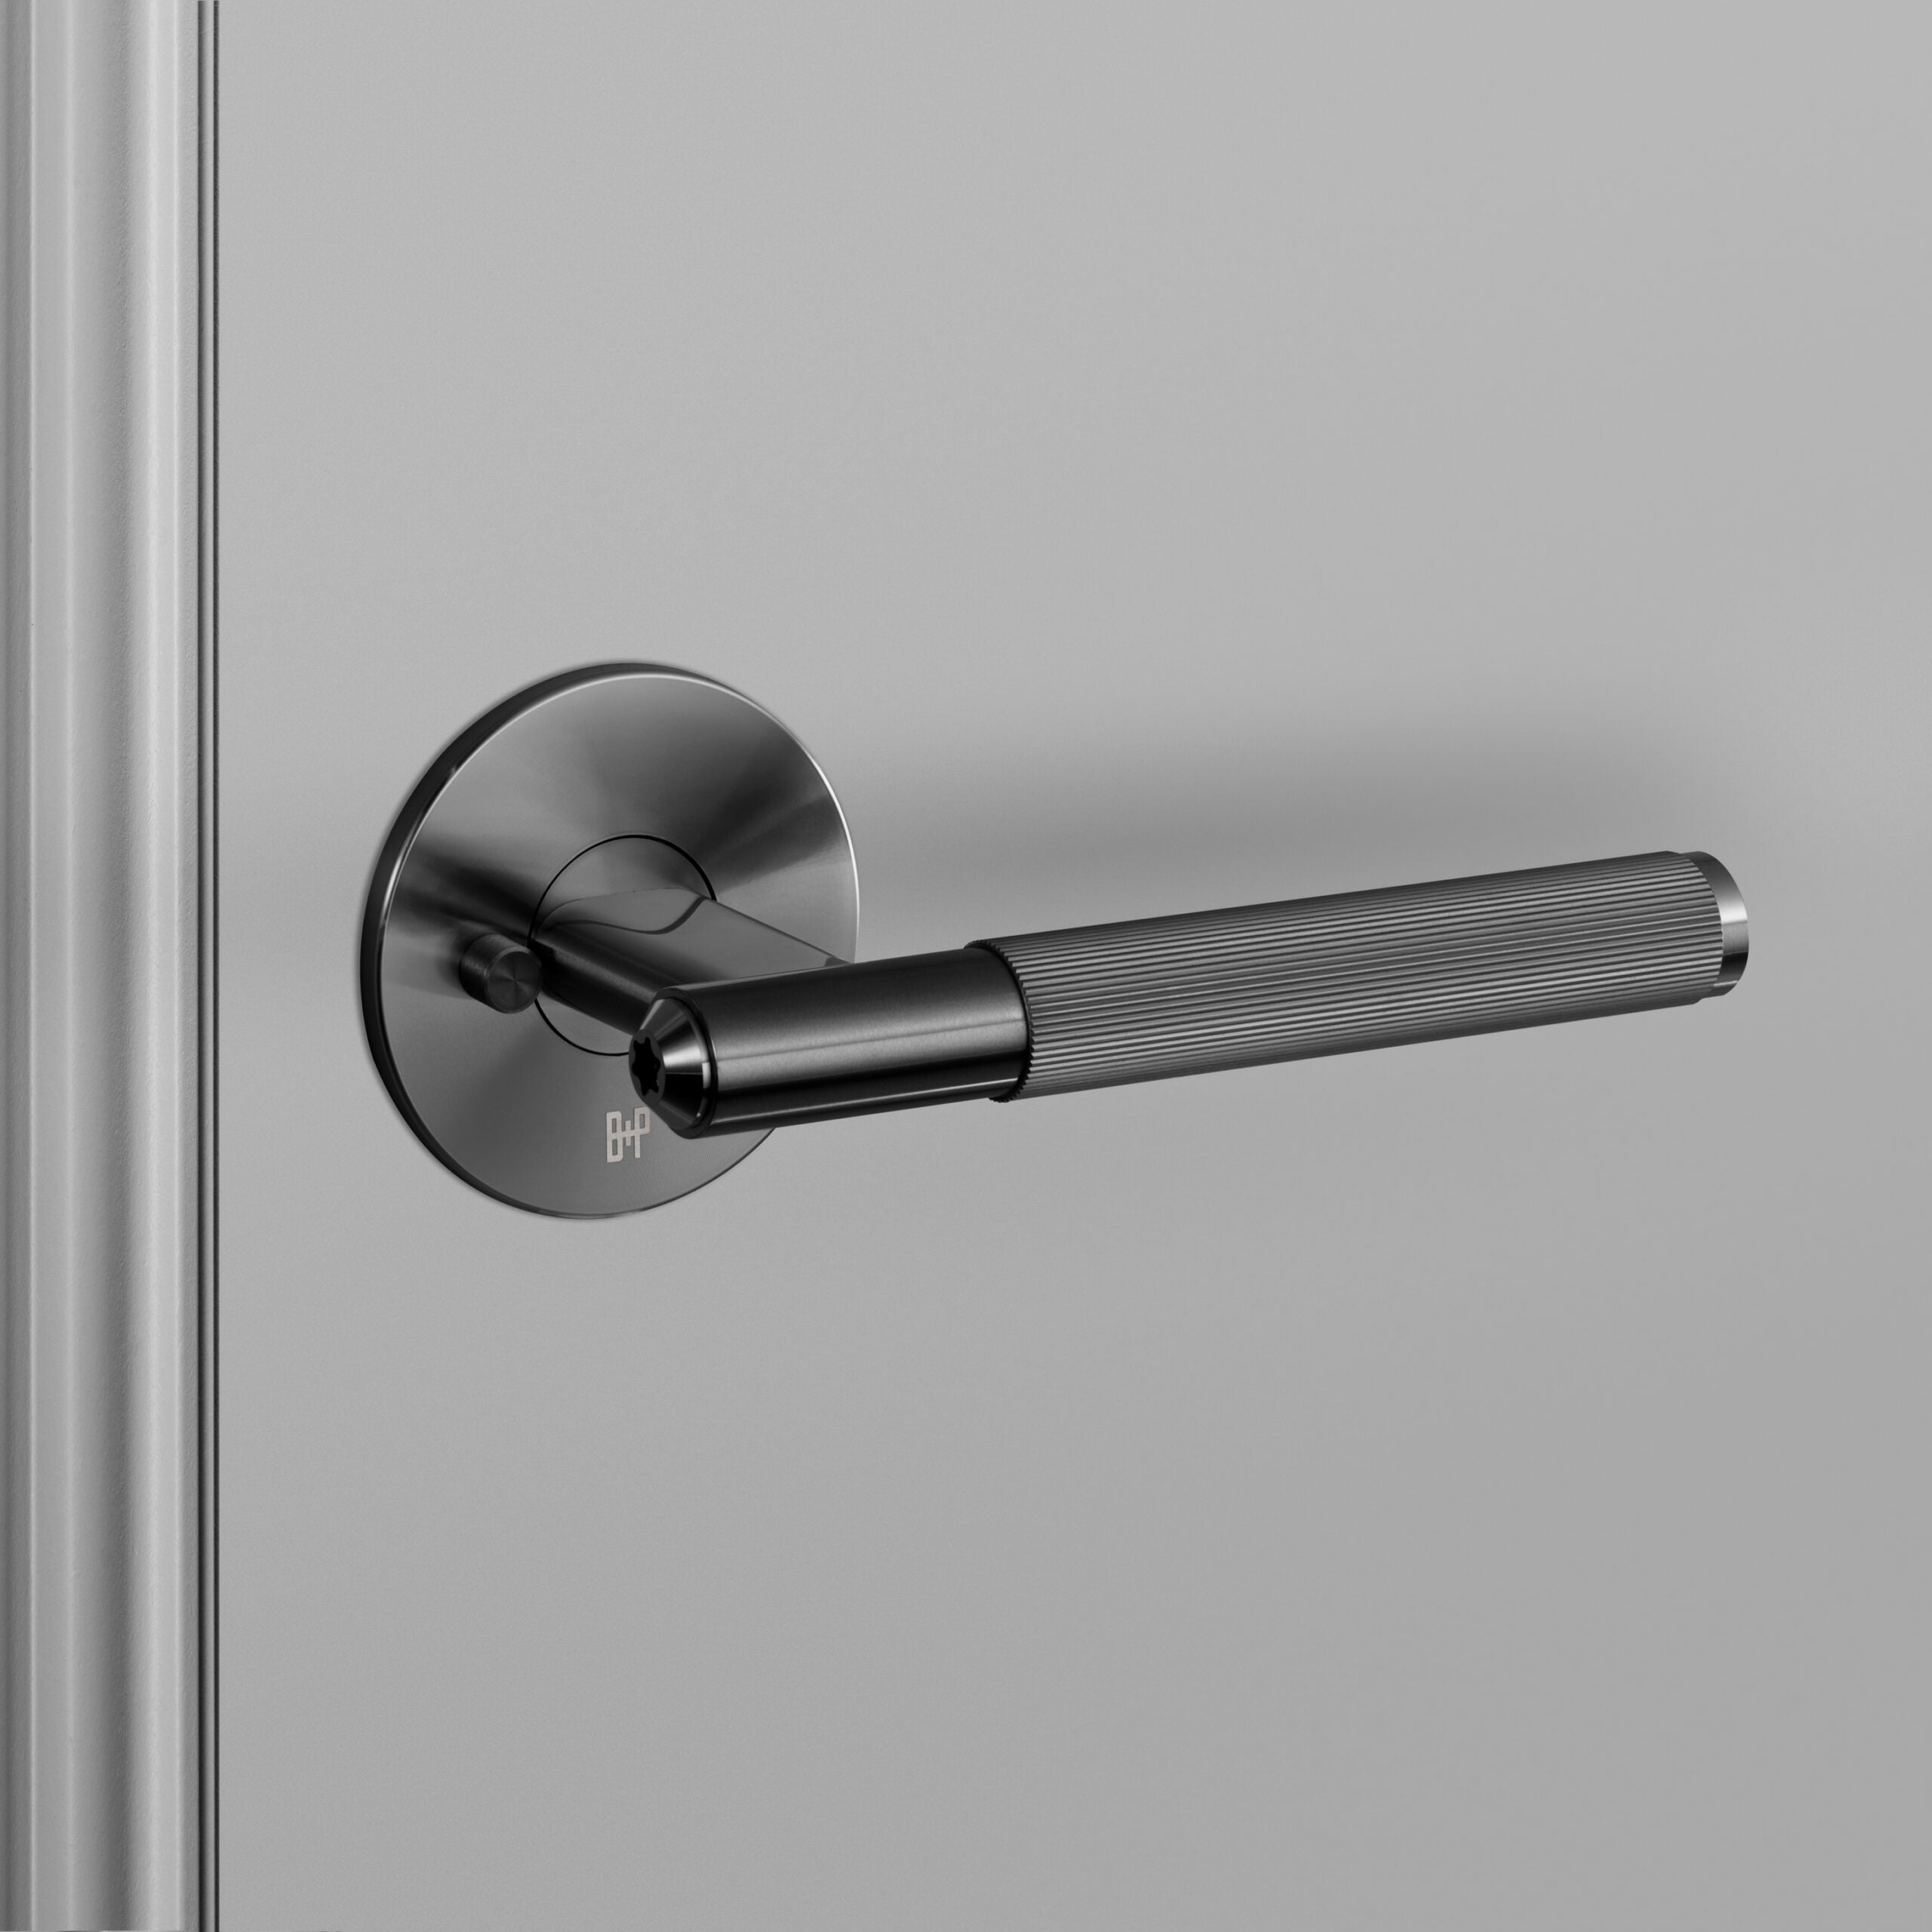 Buster + Punch Conventional Door Handle, Cross Design - PRIVACY TYPE Hardware Buster + Punch Smoked Bronze  